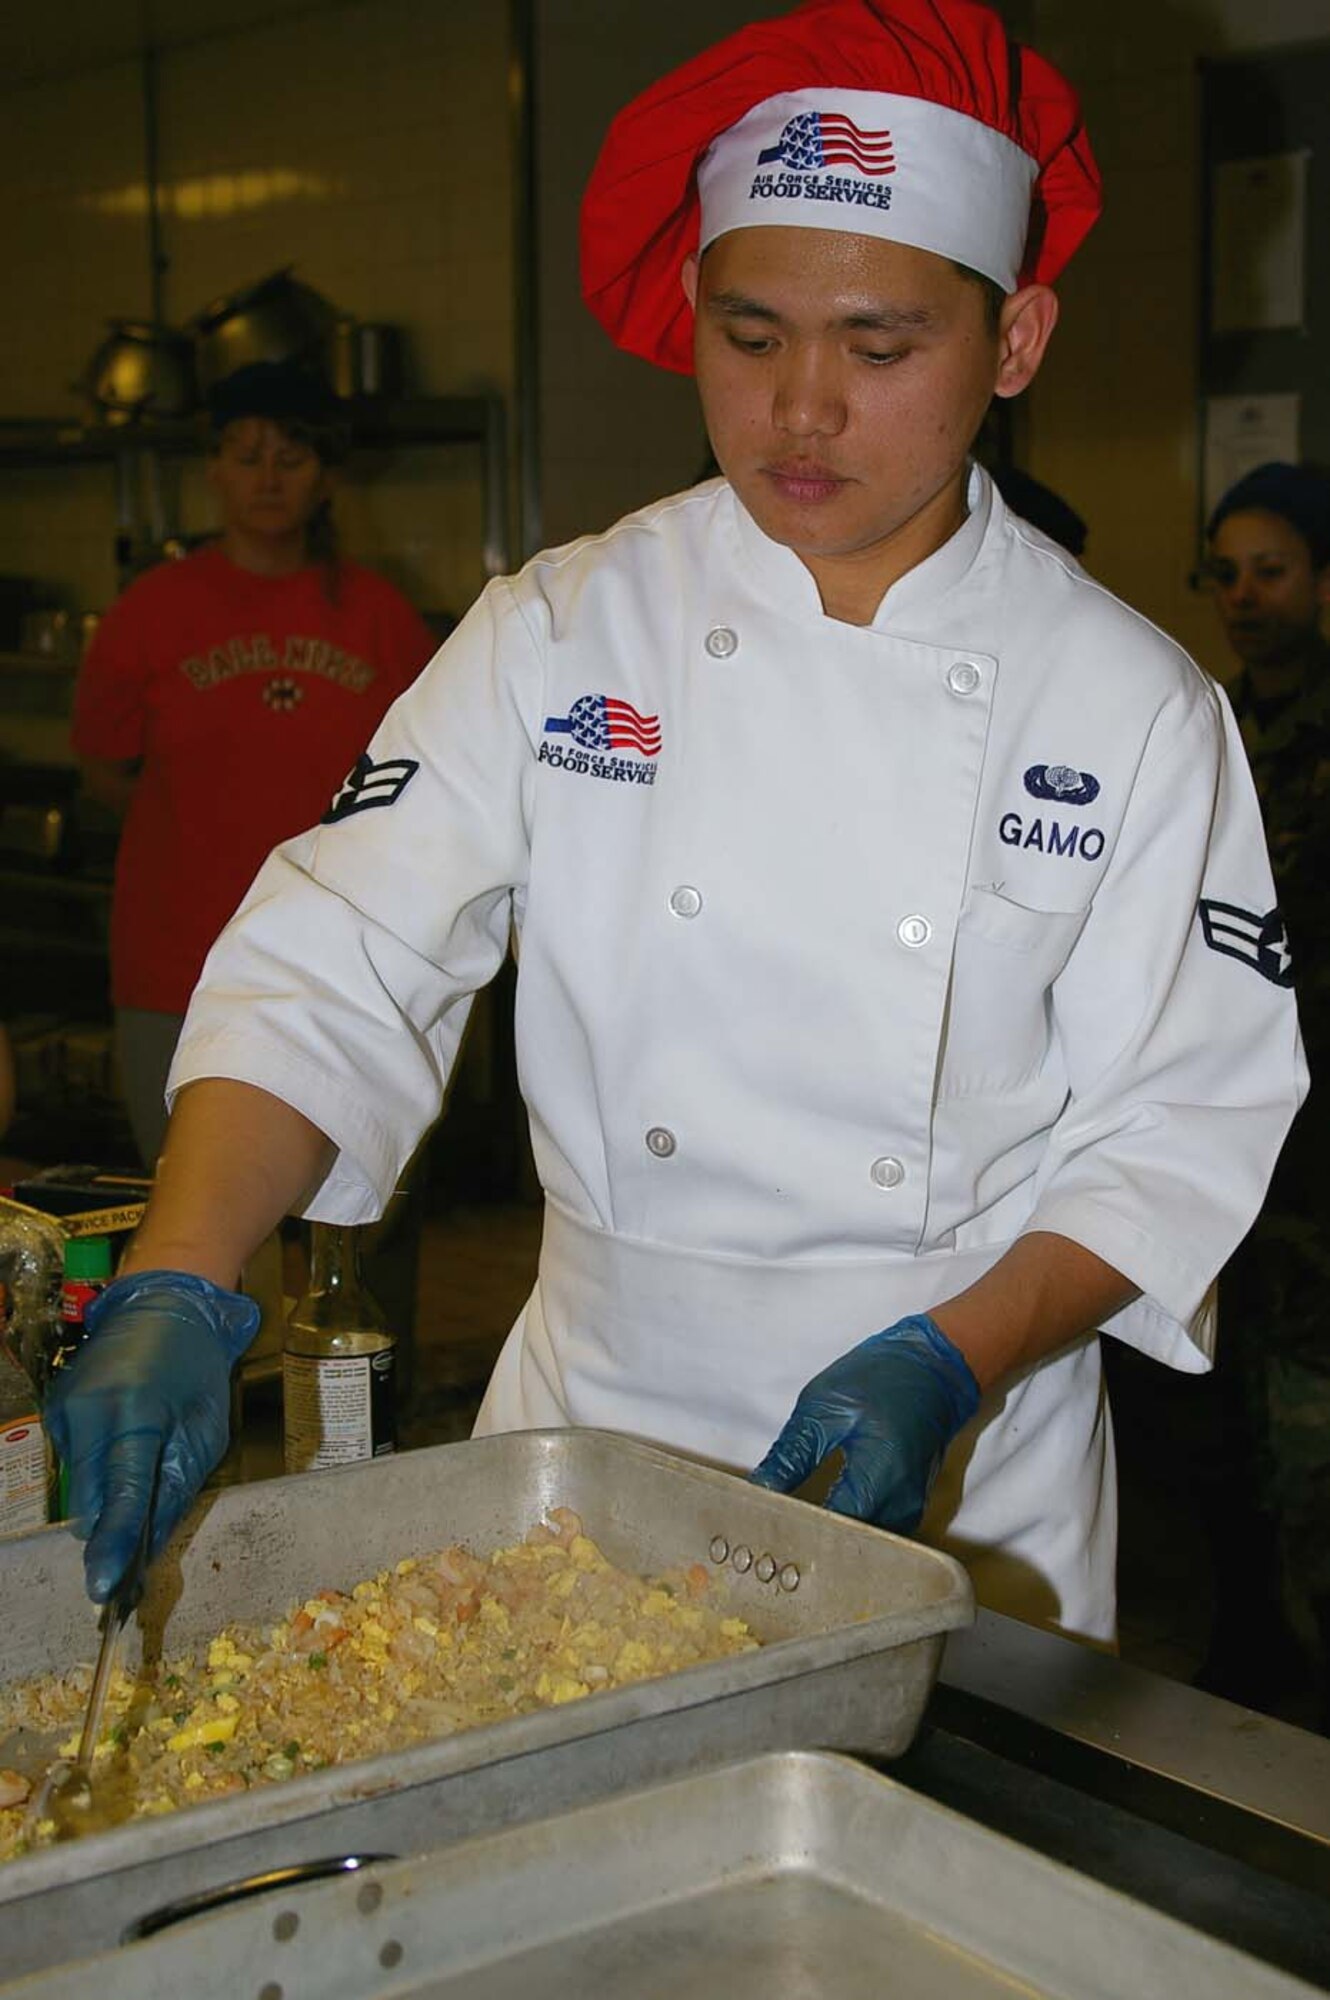 Airman 1st Class Ron Gamo, 100th Services Squadron, shows how to prepare shrimp fried rice at a cooking demonstration in the Gateway Dining Facility May 4 in celebration of Asian-Pacific Heritage Month. Airman Gamo also showed audience members how to cook chicken adobo; they were then able to sample the finished dishes after the demonstration. (U.S. Air Force photo by Karen Abeyasekere)